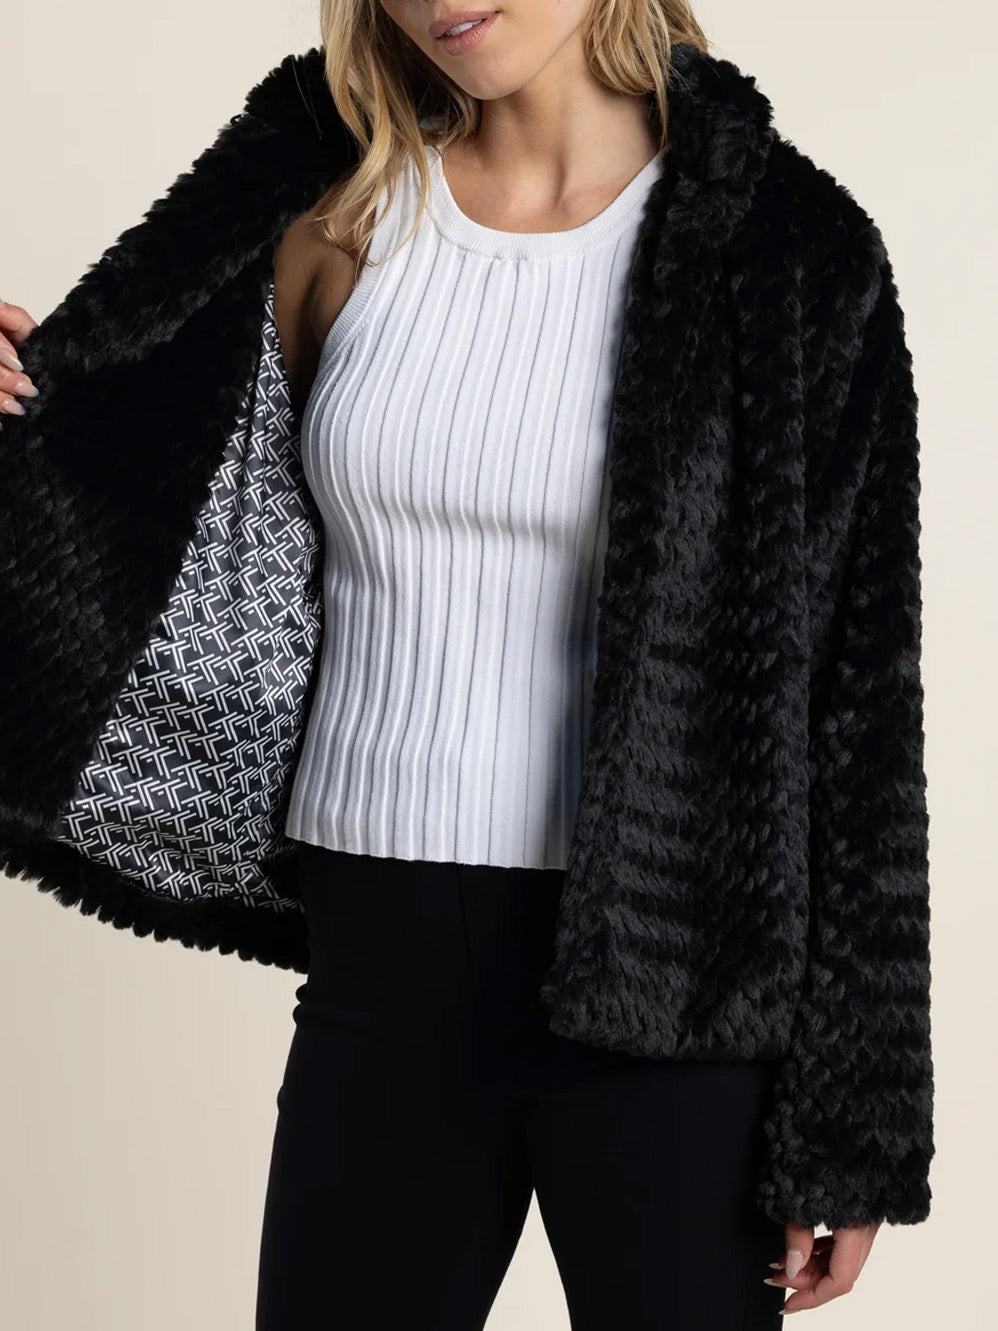 TWO-T'S TEXTURED FUR JACKET